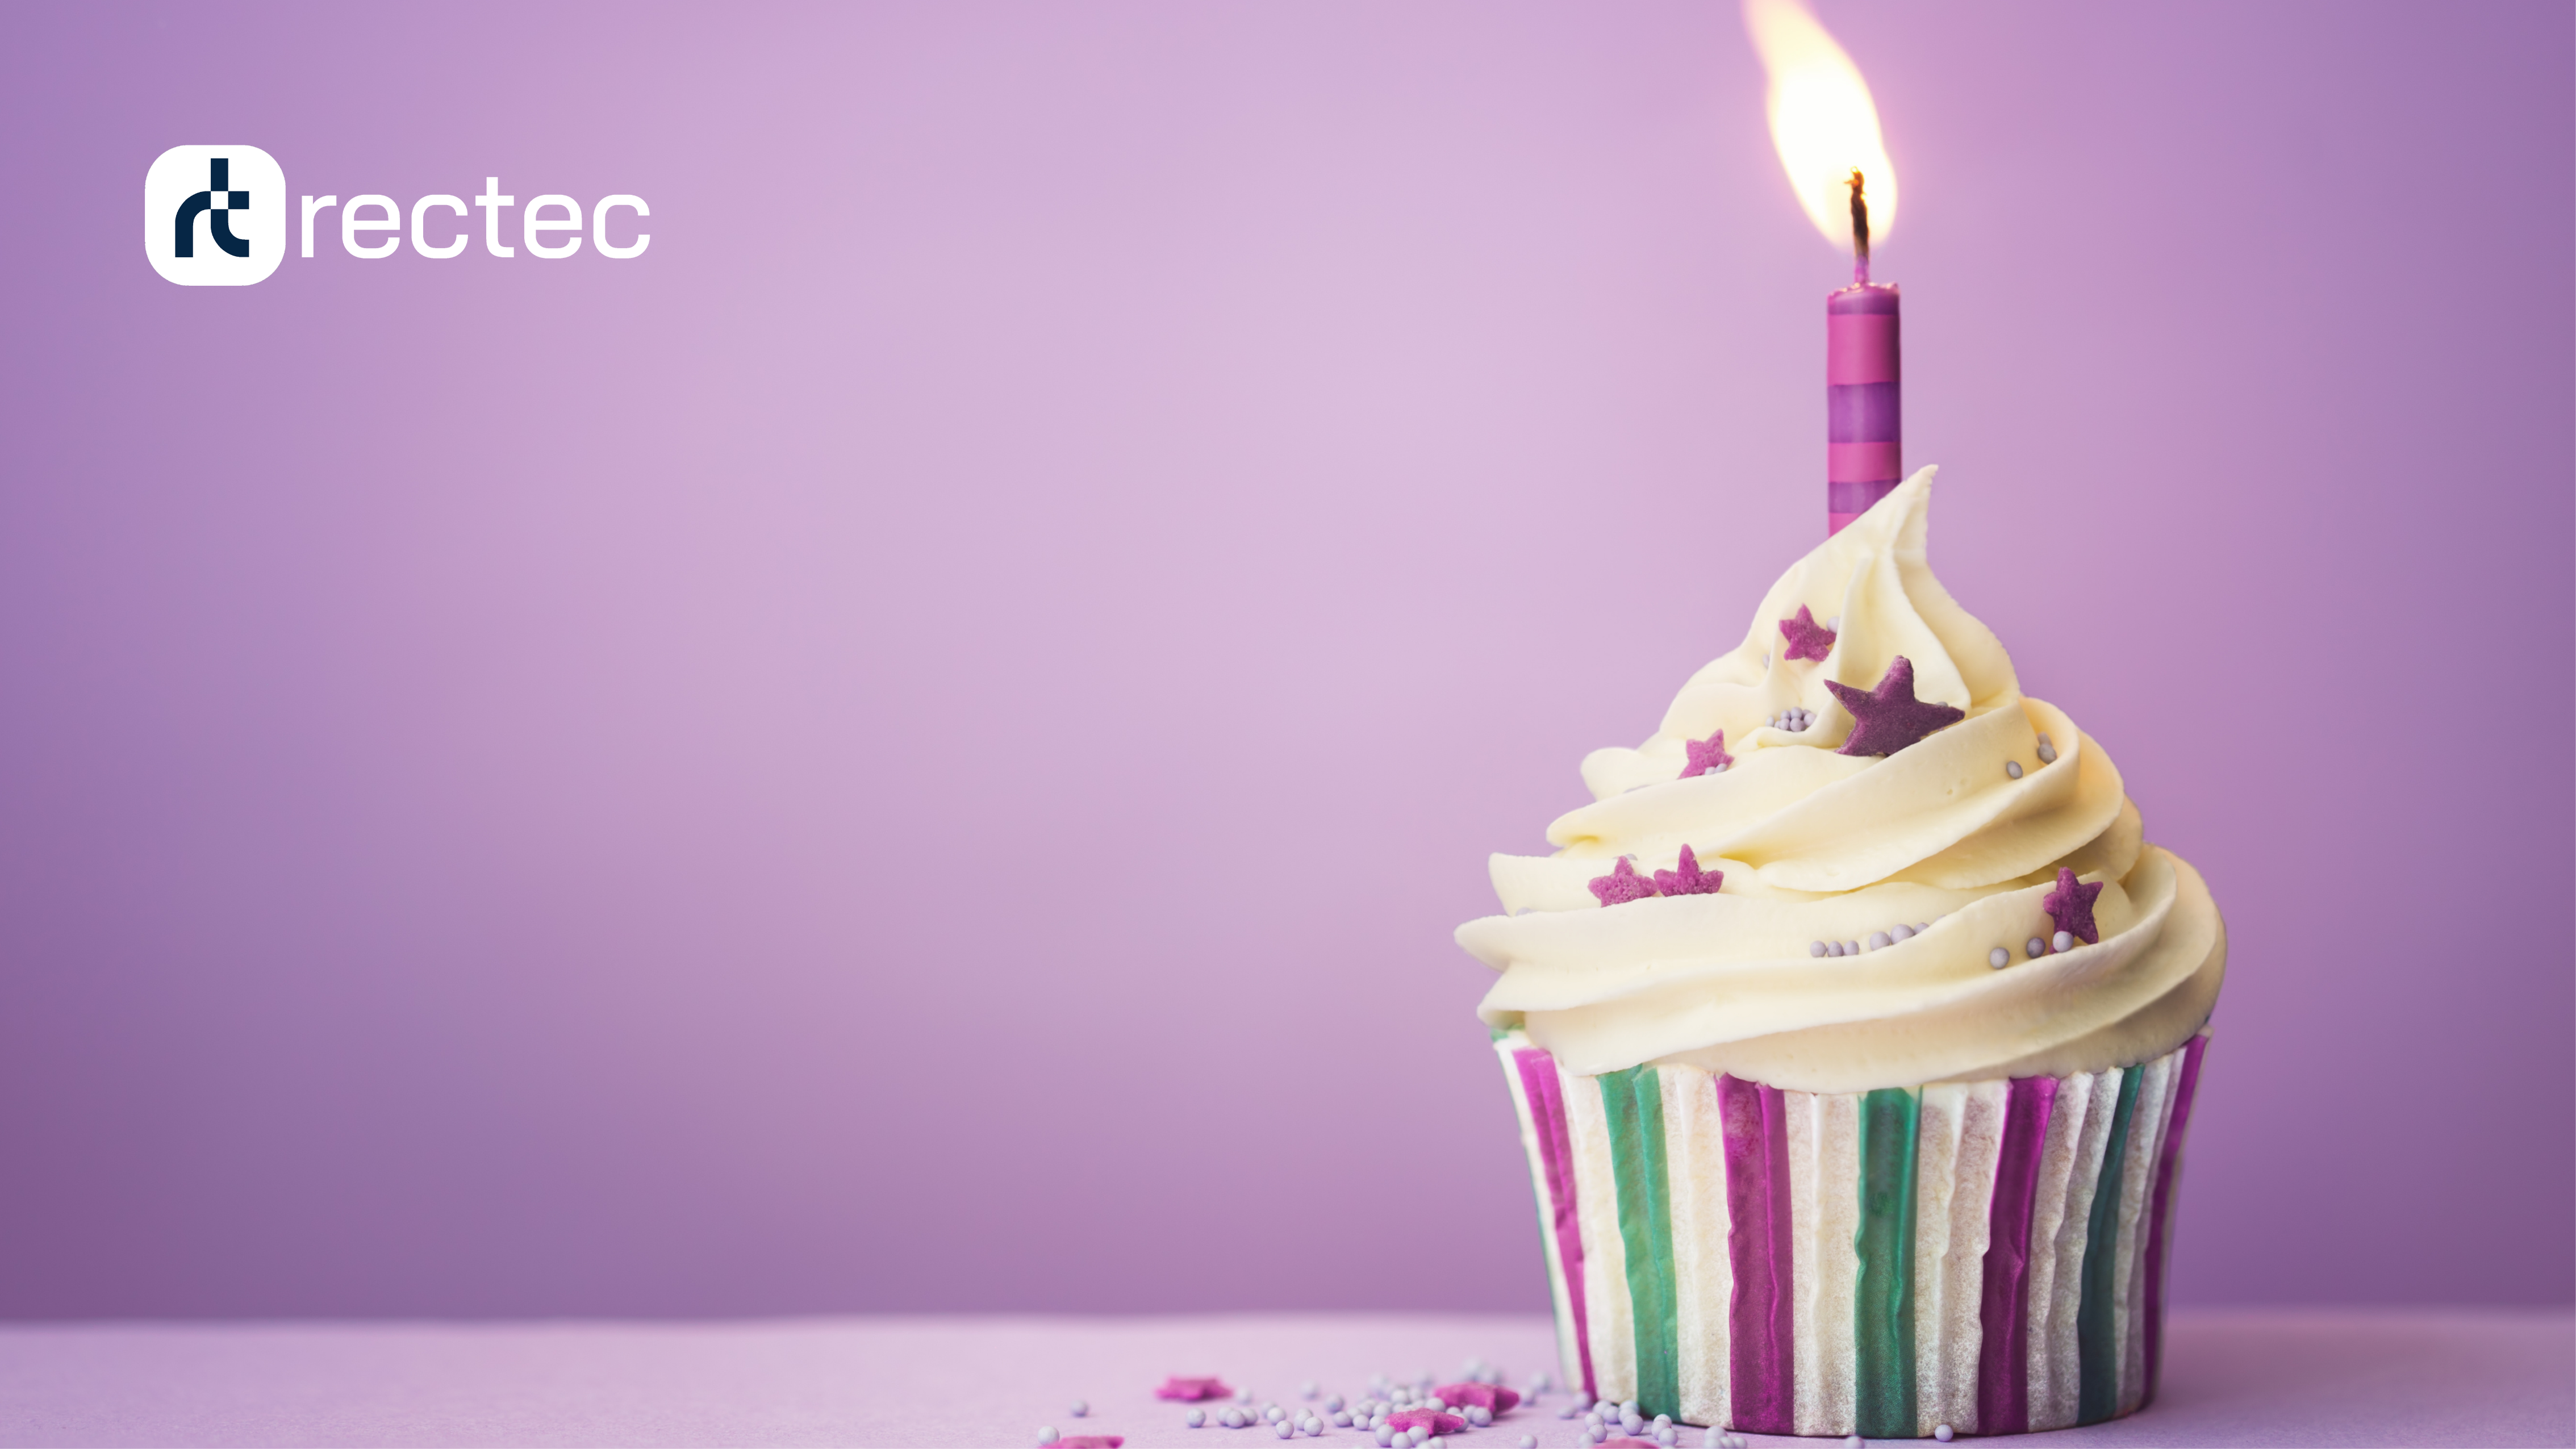 Rectec Compare is 1 Year old!